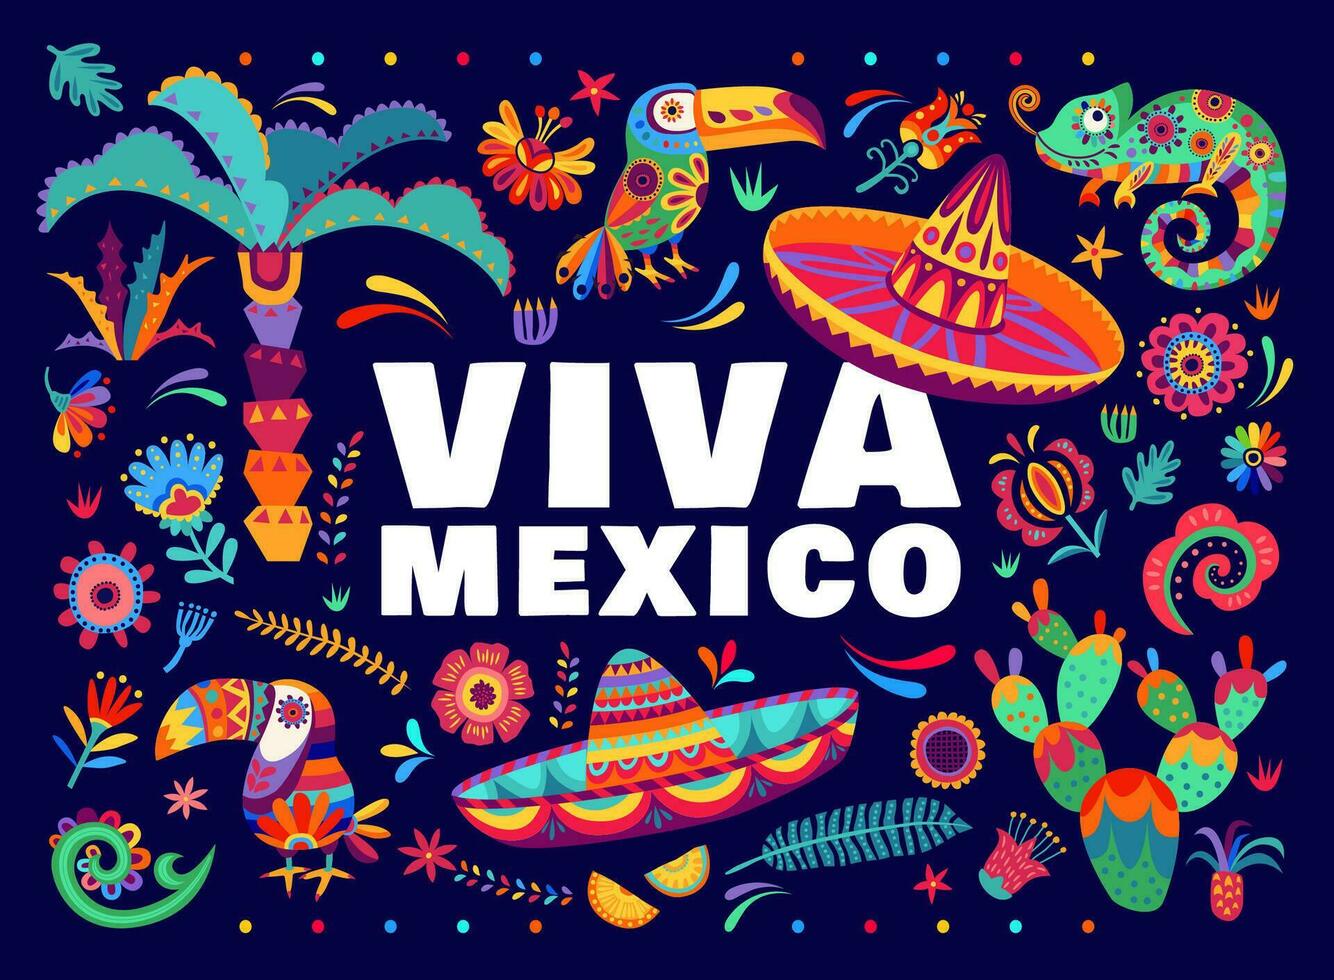 Viva mexico banner with tropical flowers, cactuses vector